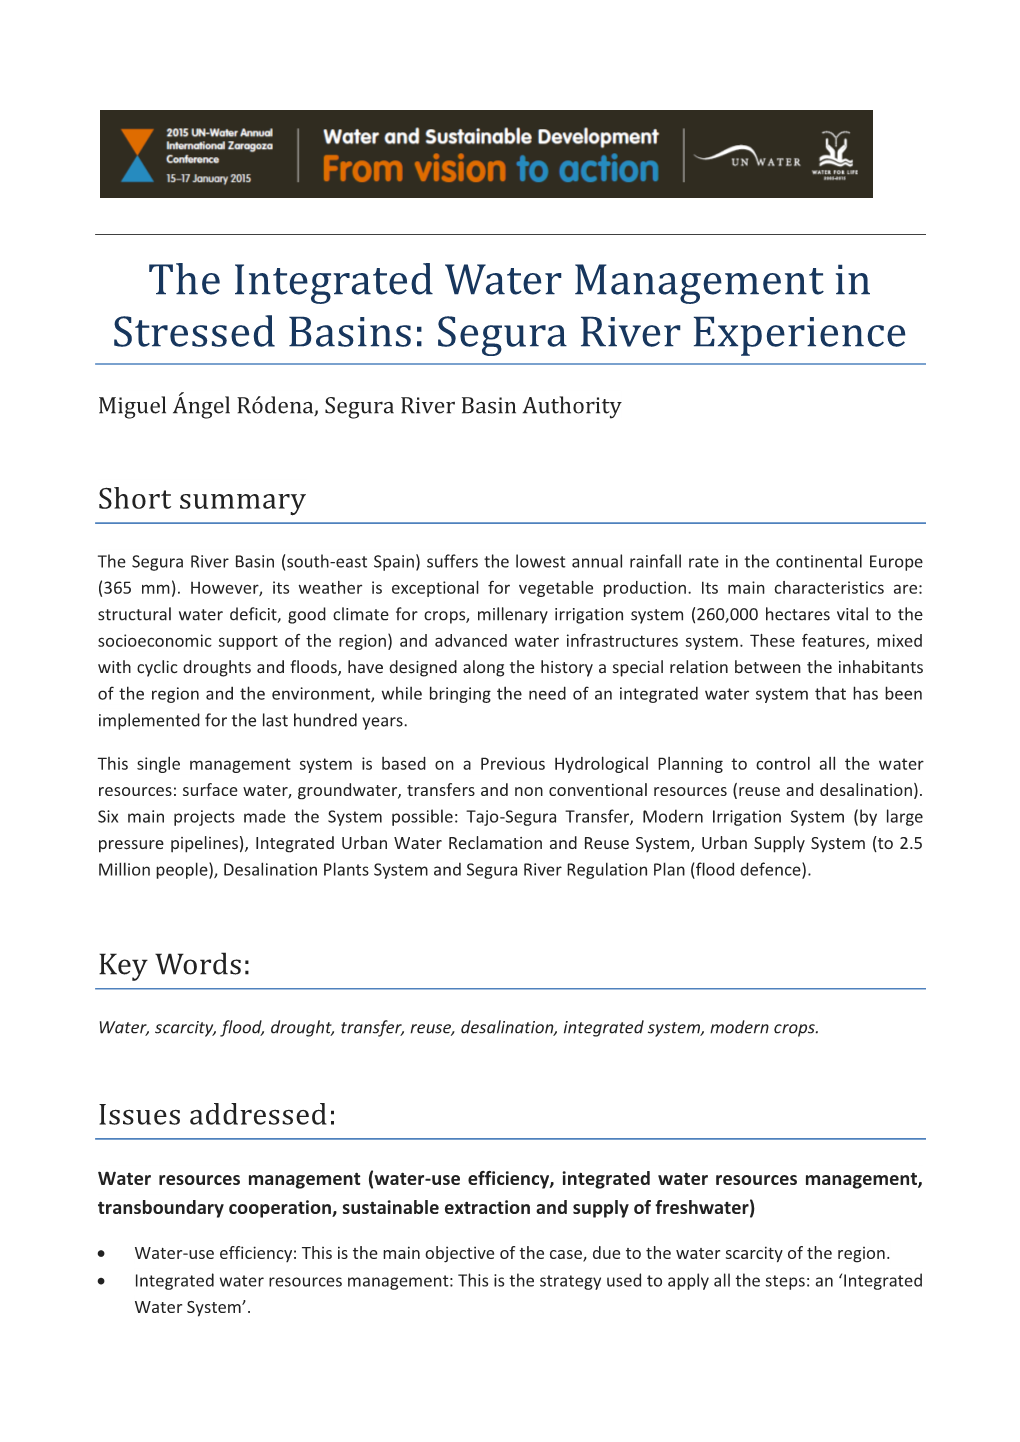 The Integrated Water Management in Stressed Basins: Segura River Experience